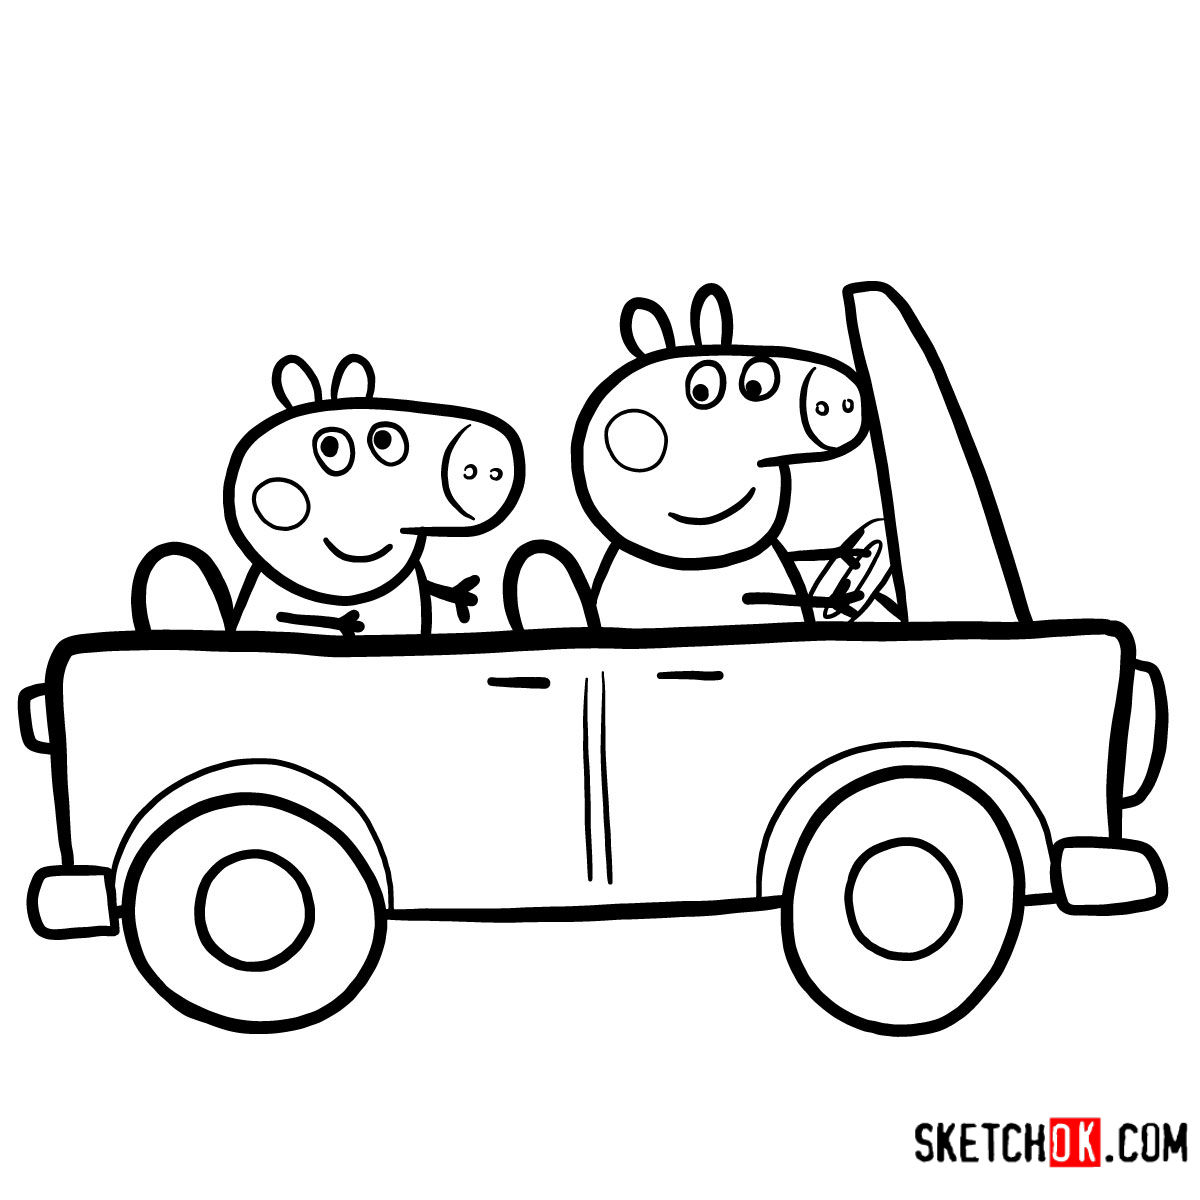 How to draw George Pig with Mummy Pig riding a car